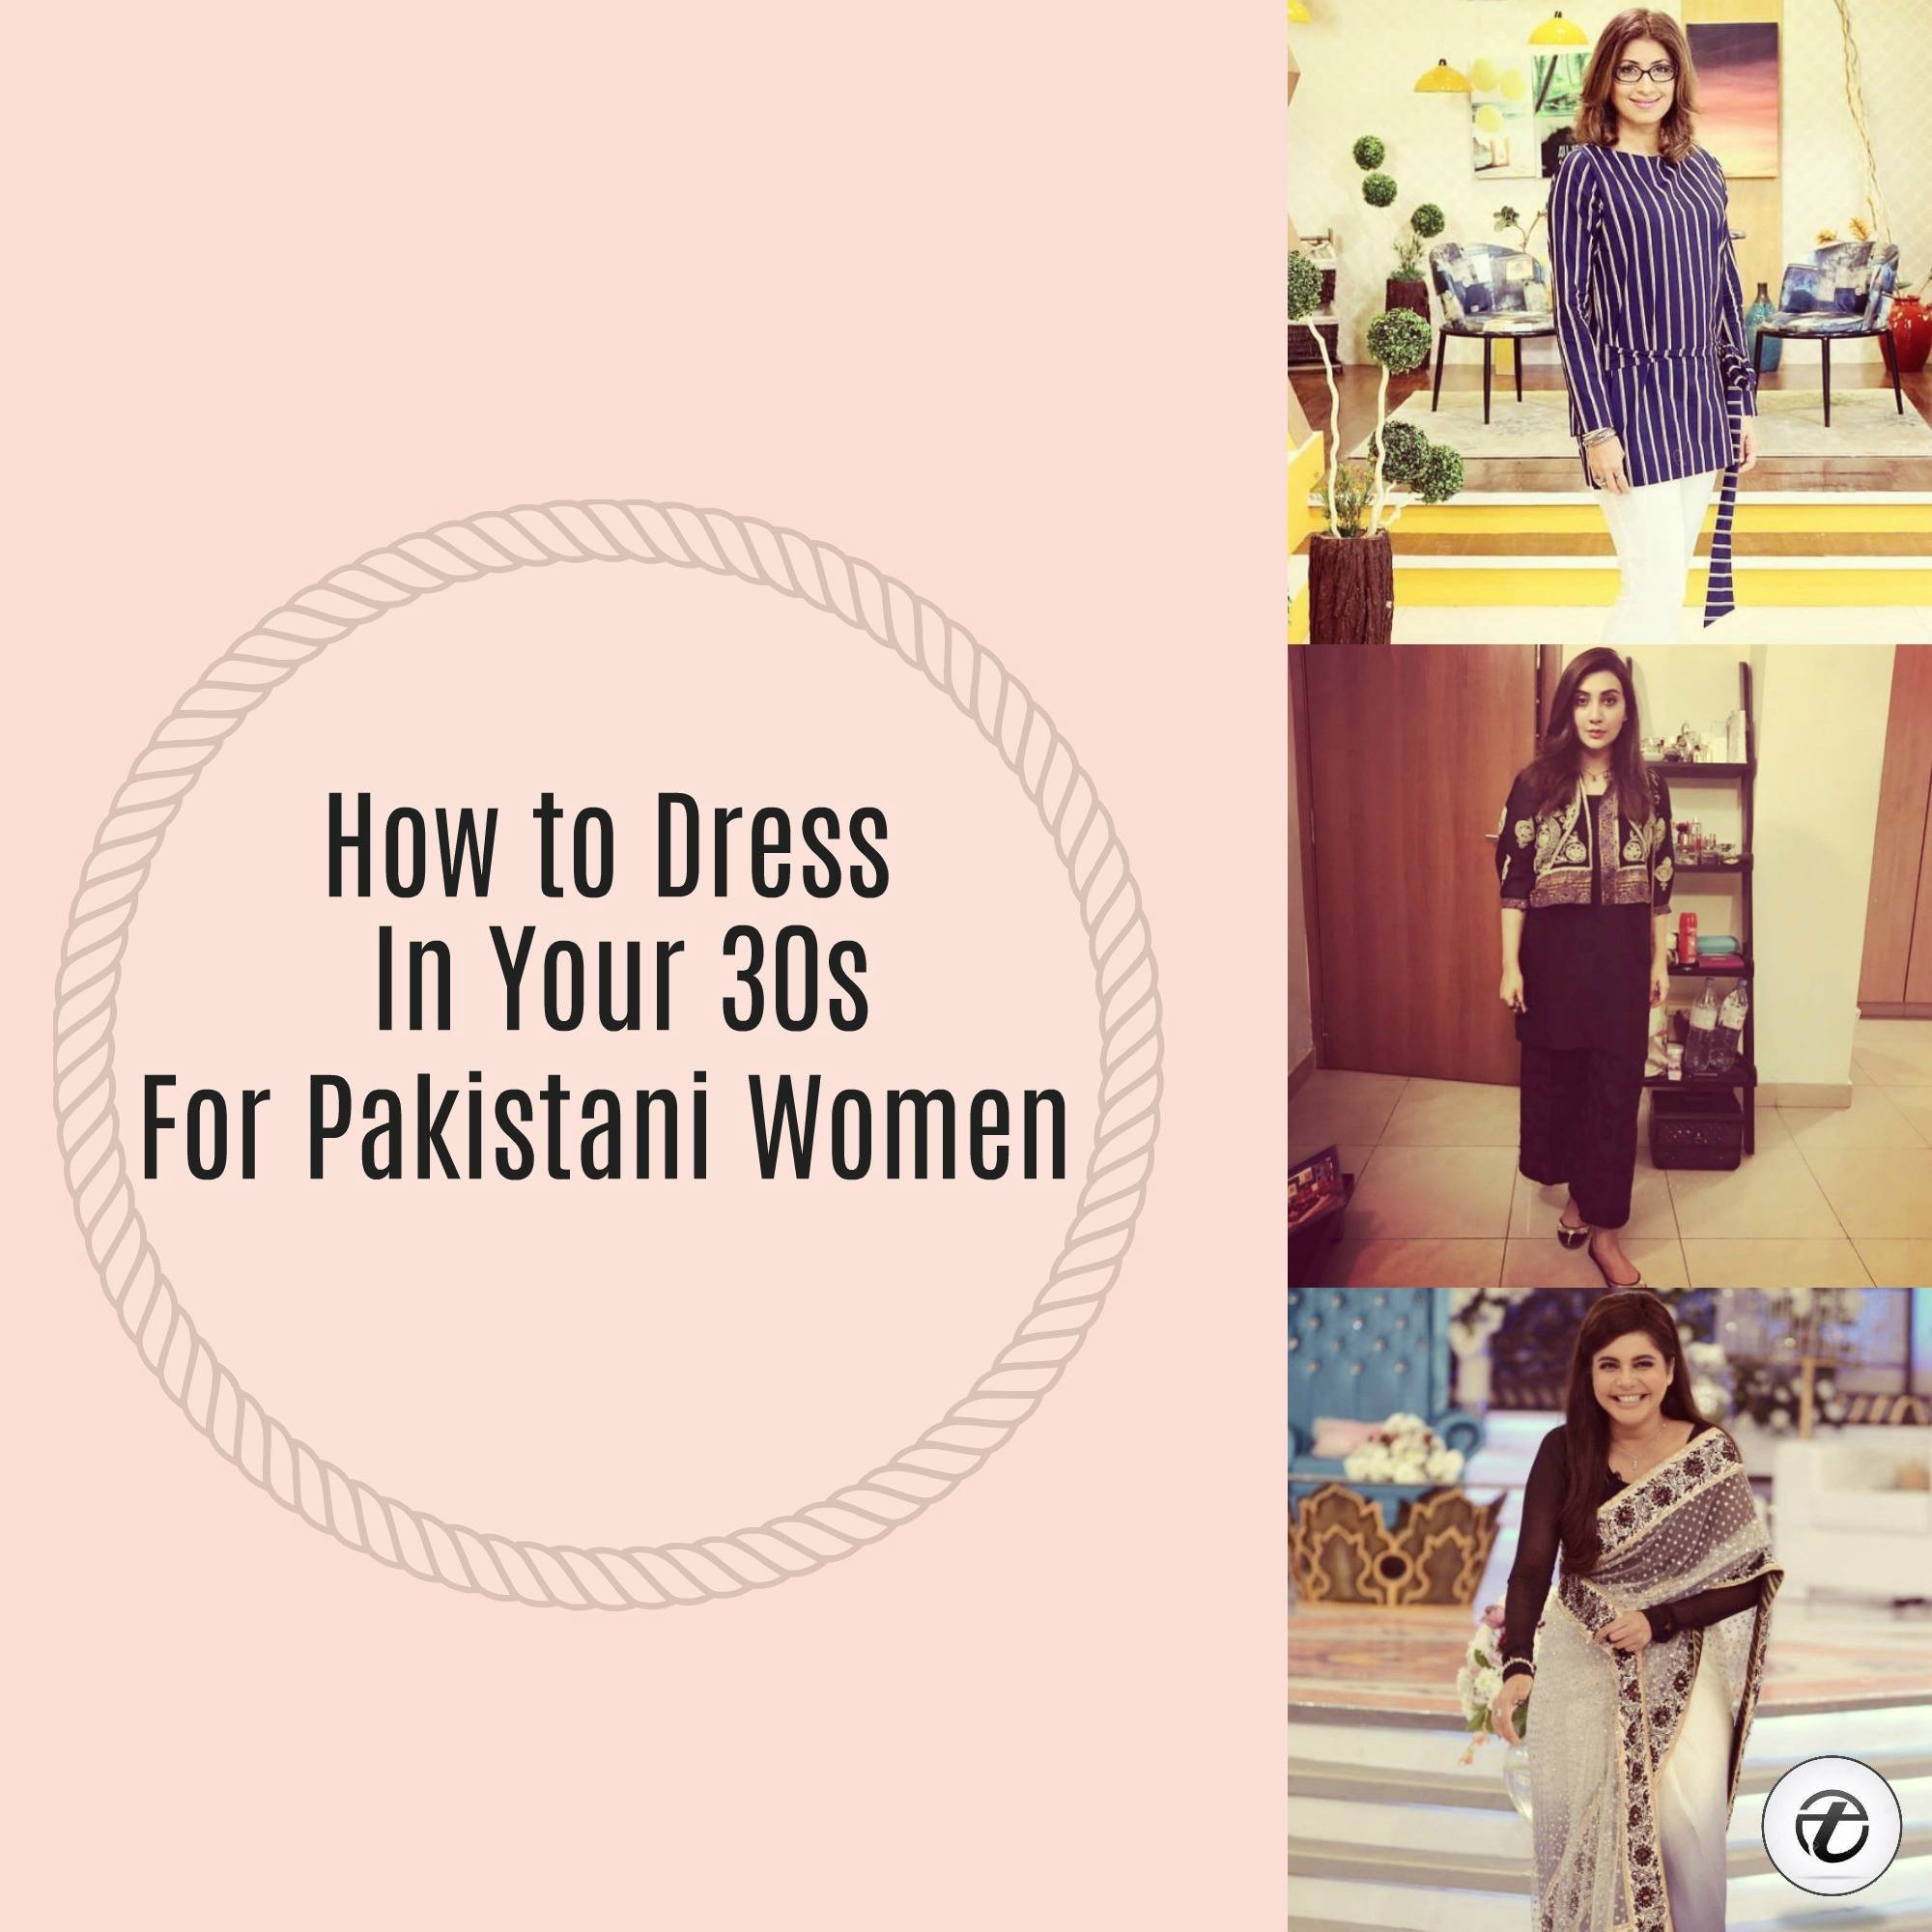 Outfits for Pakistani Women Over 30